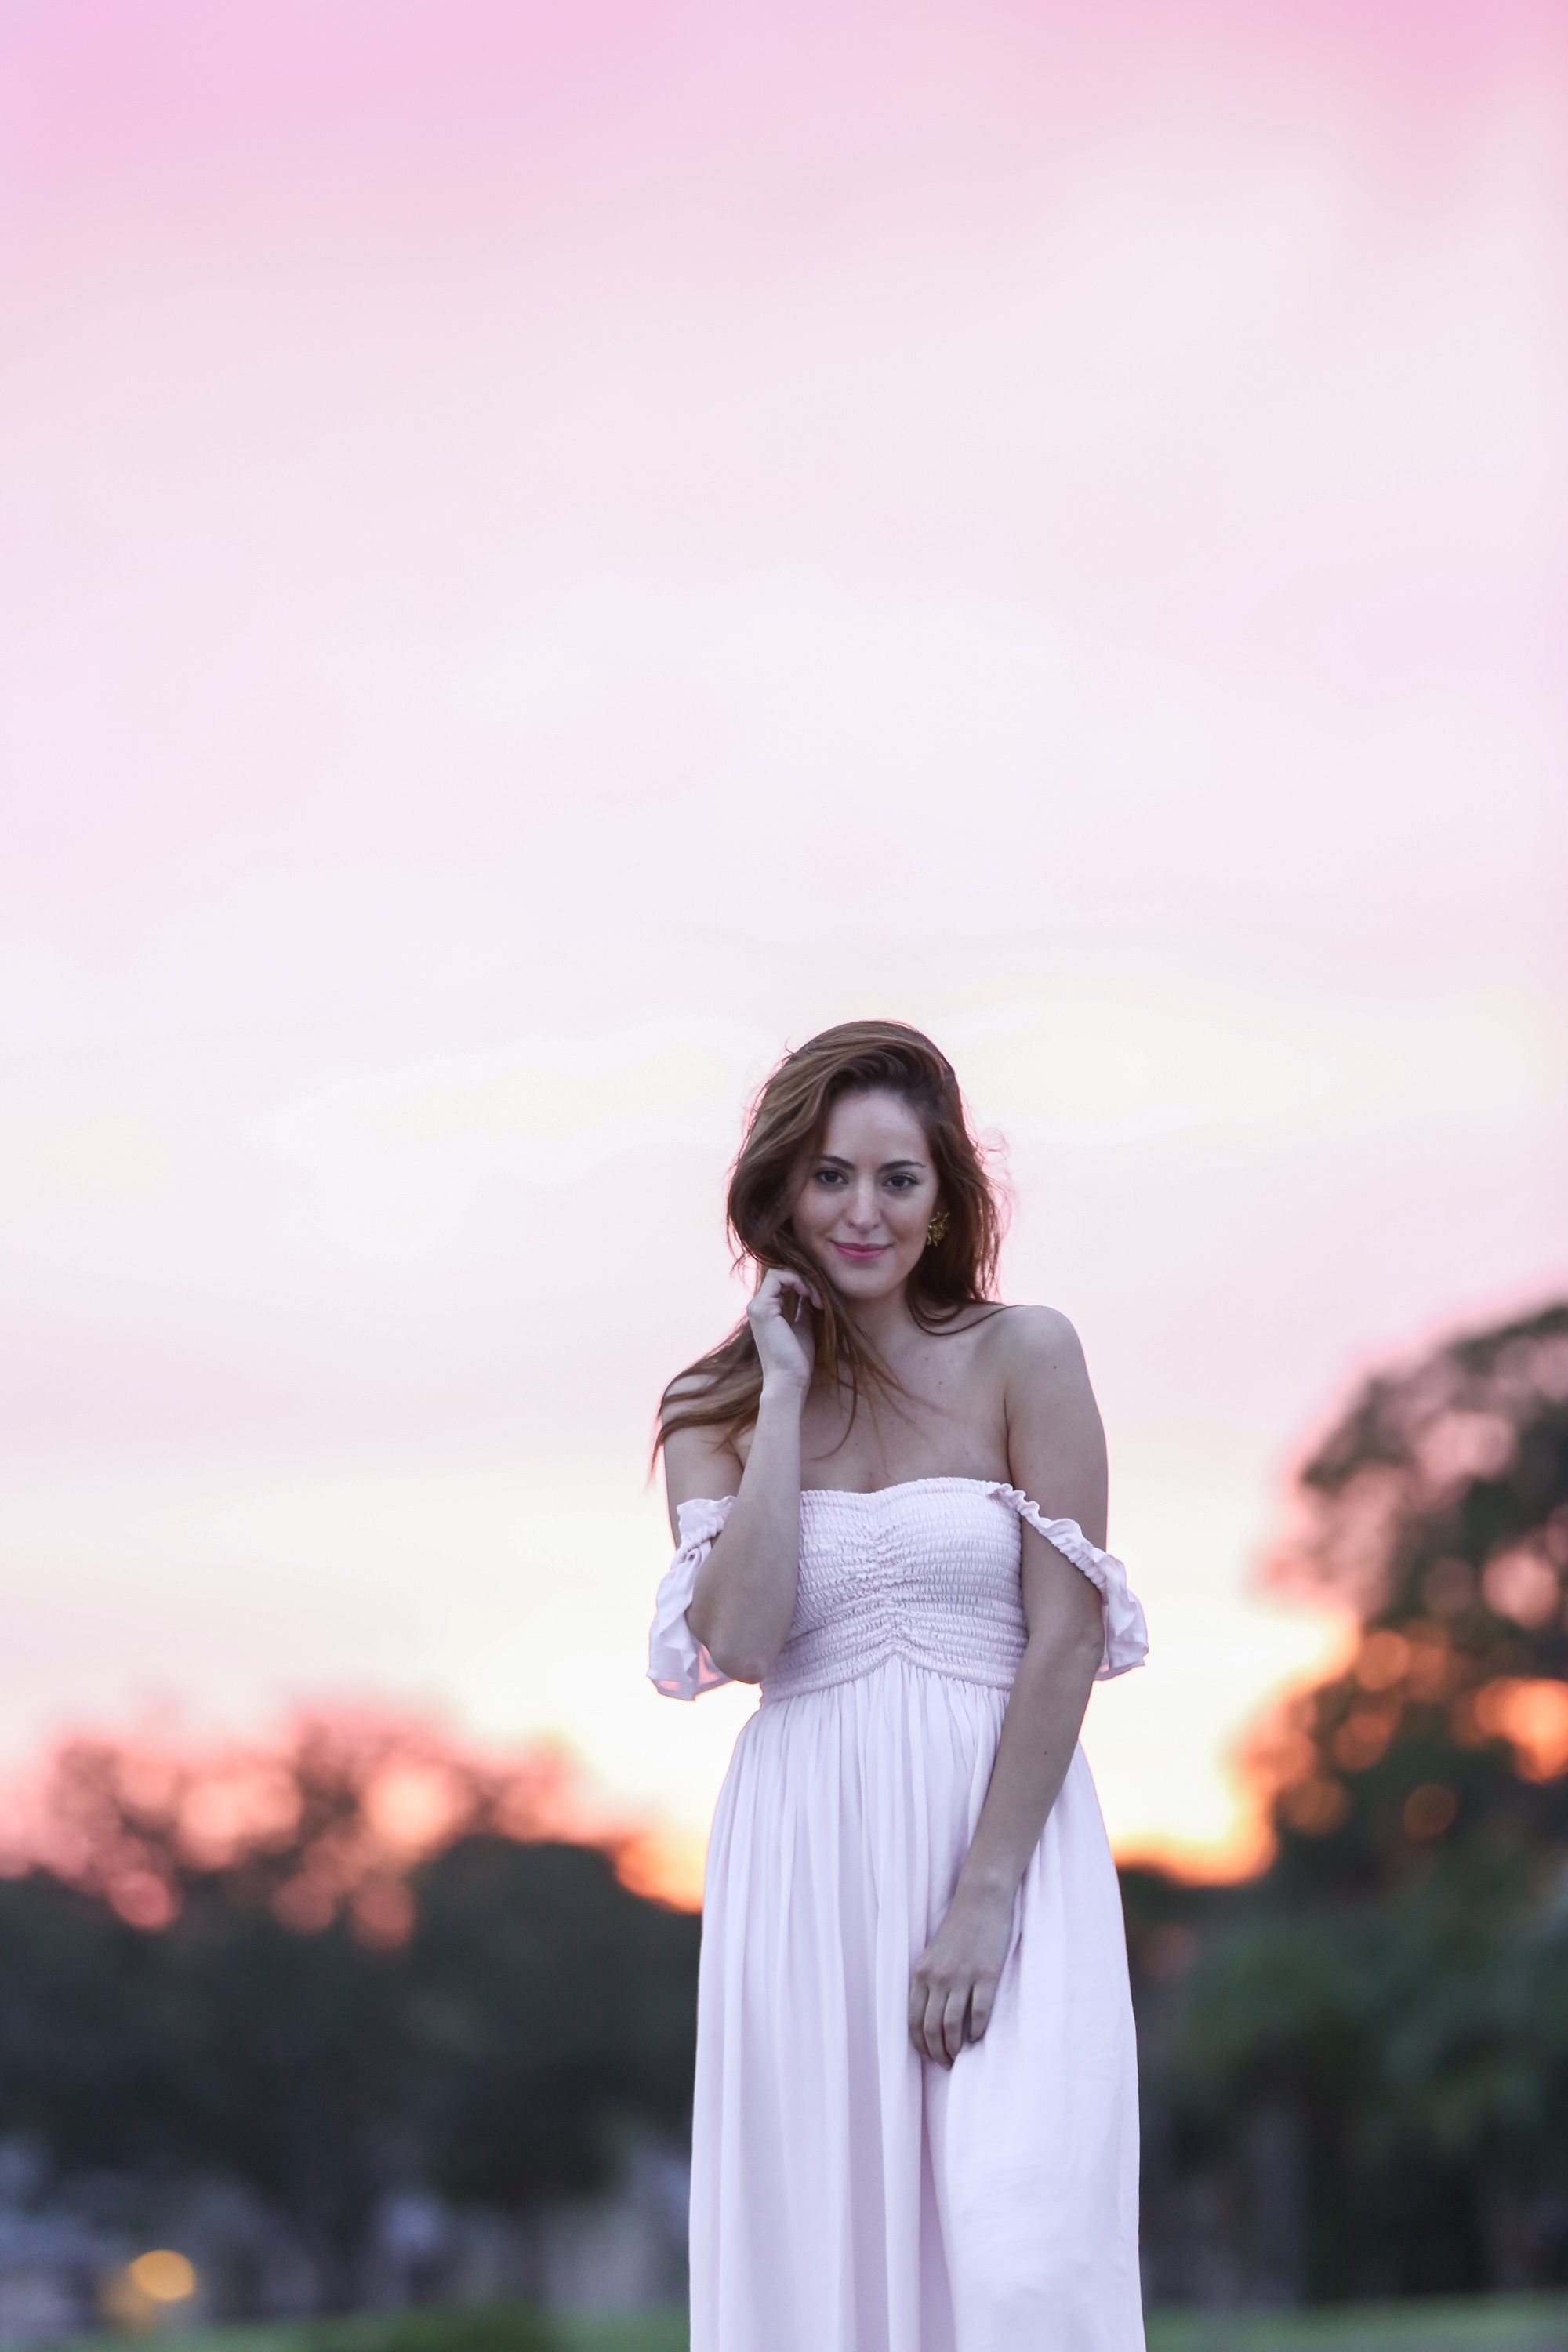 golden hour, pink magic, cotton candy skies, pink sky, plum pretty sugar honor dress in sunset